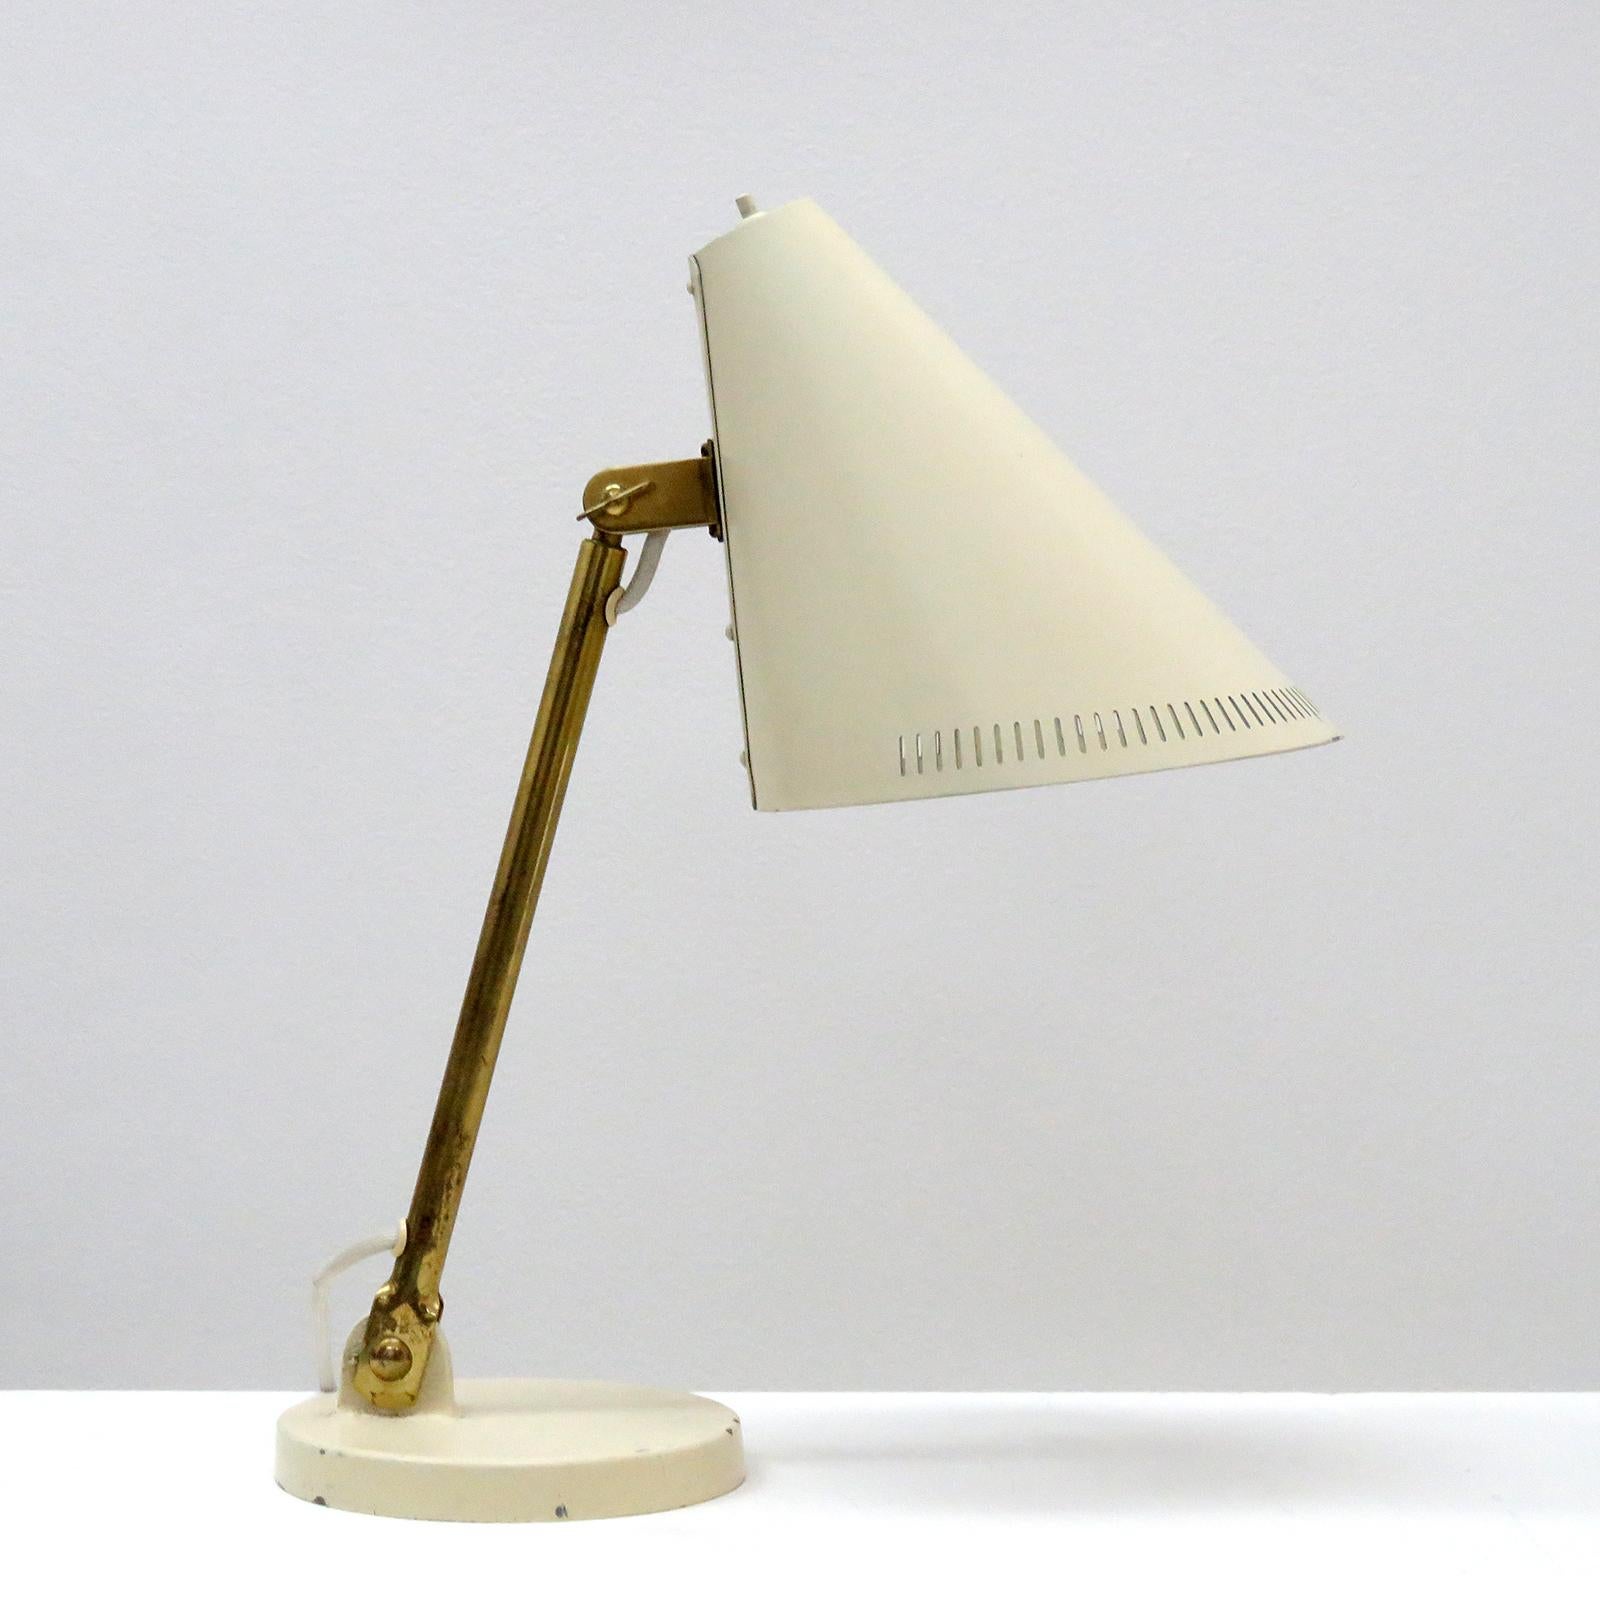 Wonderful early desk lamp model 5305 by Paavo Tynell for Taito, Finland, with a large articulate crème colored enameled shade and base, the shade is partially perforated and the brass arm is adjustable, stamped OY Taito 9222 at the shade, wired for